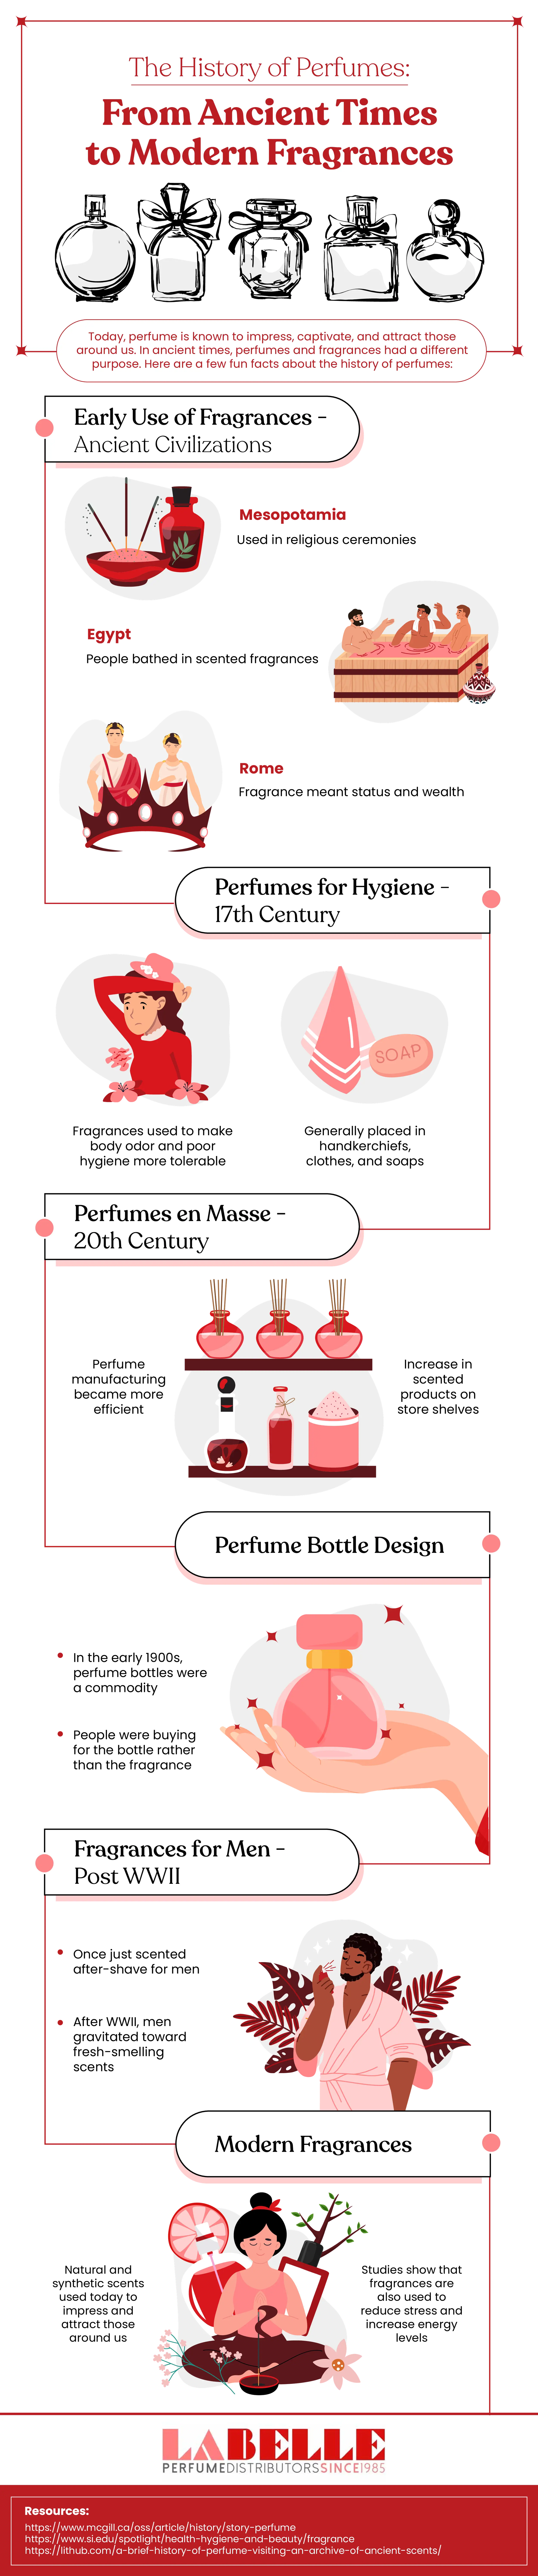 The History of Perfumes: From Ancient Times to Modern Fragrances - LaBelle Perfumes